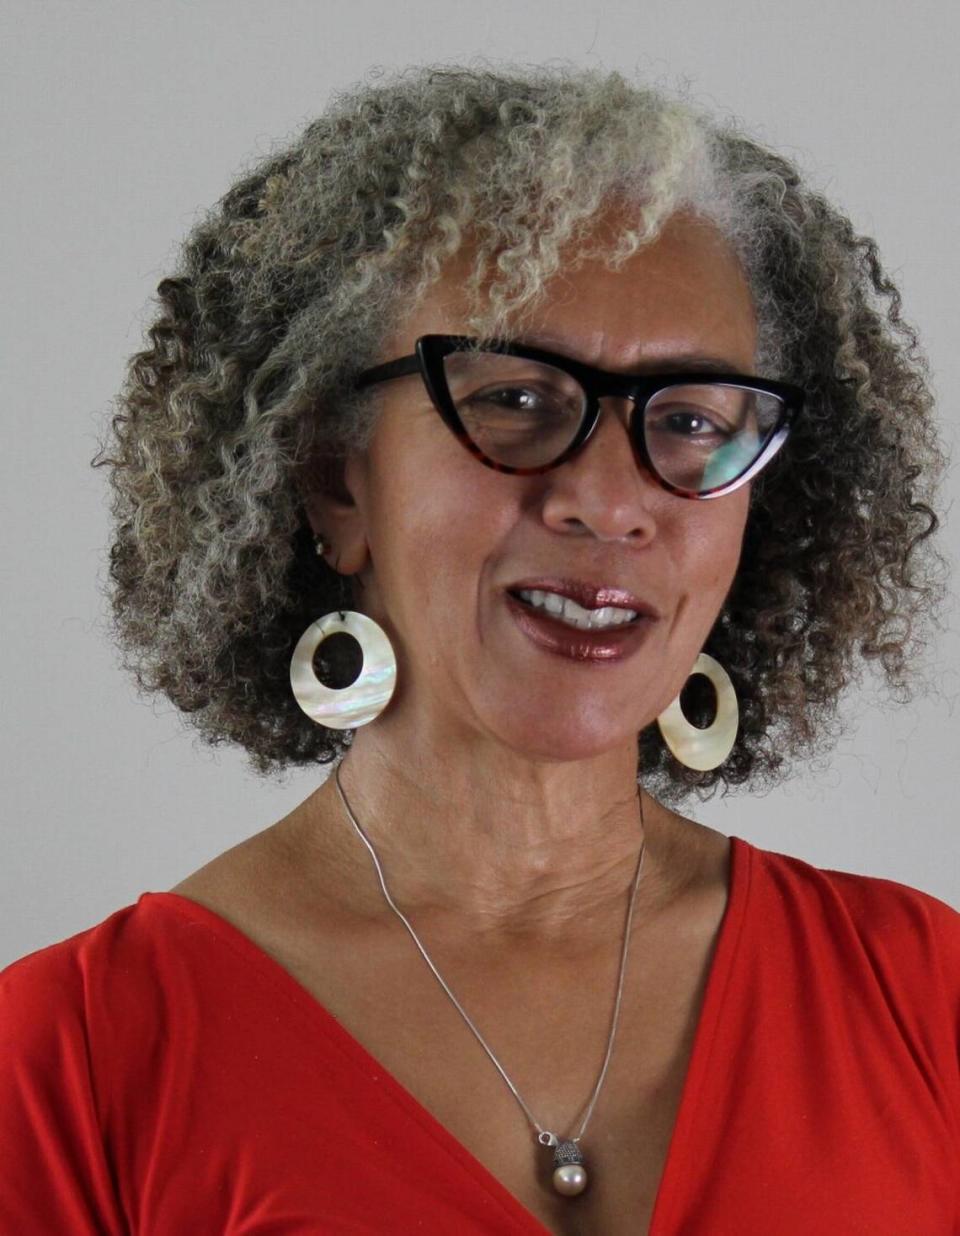 Carole Boston Weatherford is the author of dozens of children’s books, including the award-winning illustrated children’s book, “Unspeakable: The Tulsa Race Massacre.”